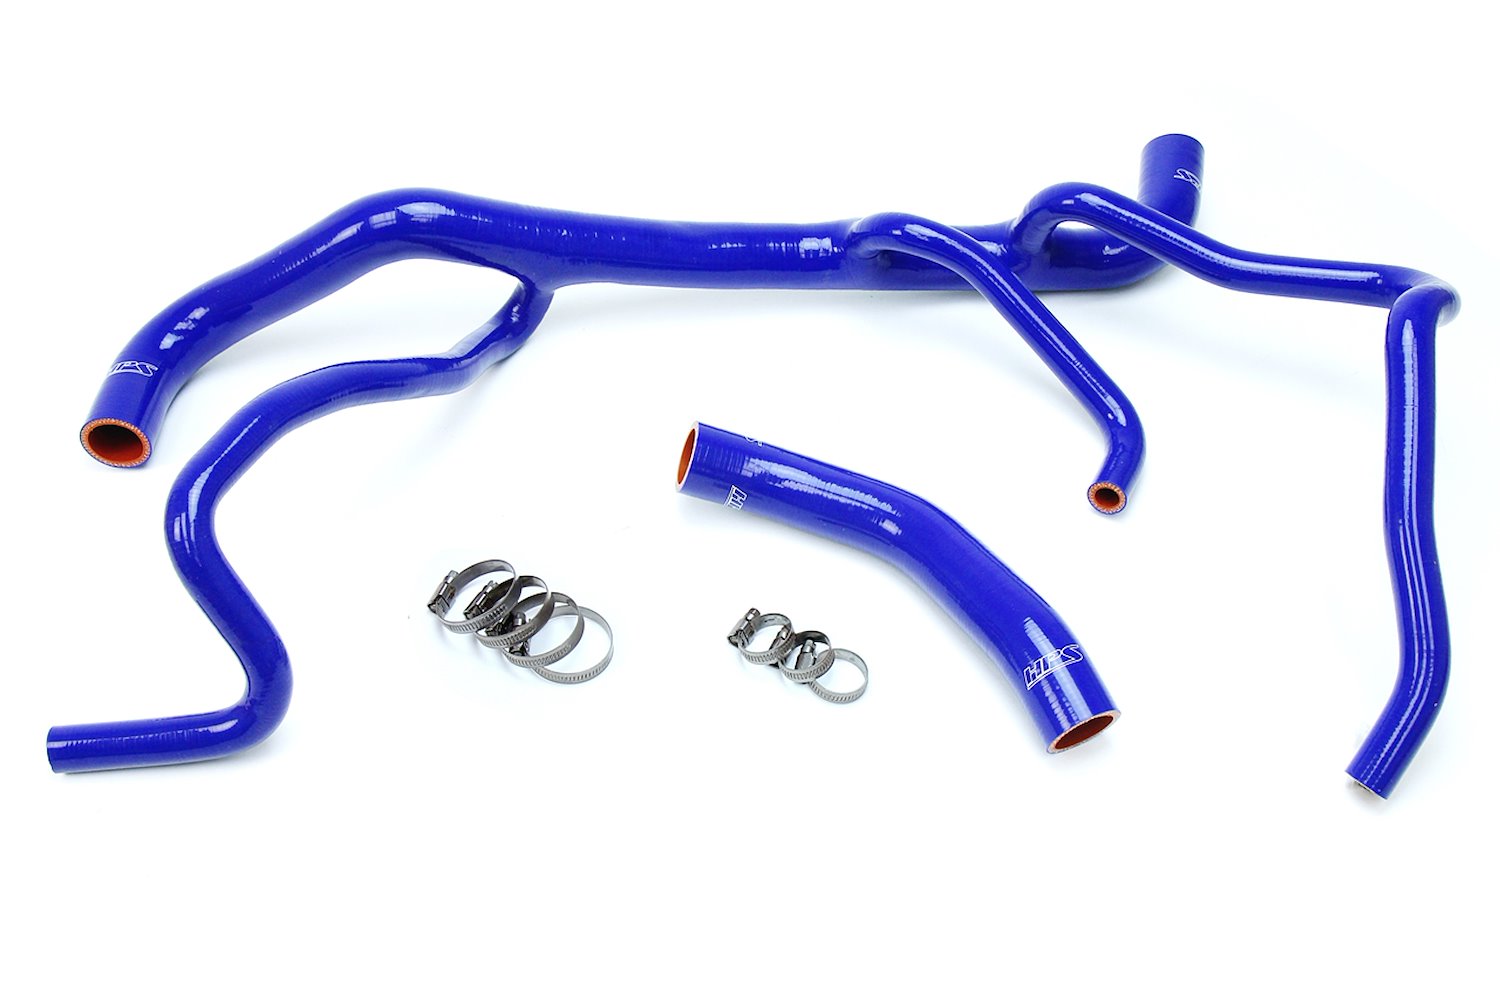 57-1664-BLUE Radiator Hose Kit, High-Temp 3-Ply Reinforced Silicone, Replace OEM Rubber Radiator Coolant Hoses